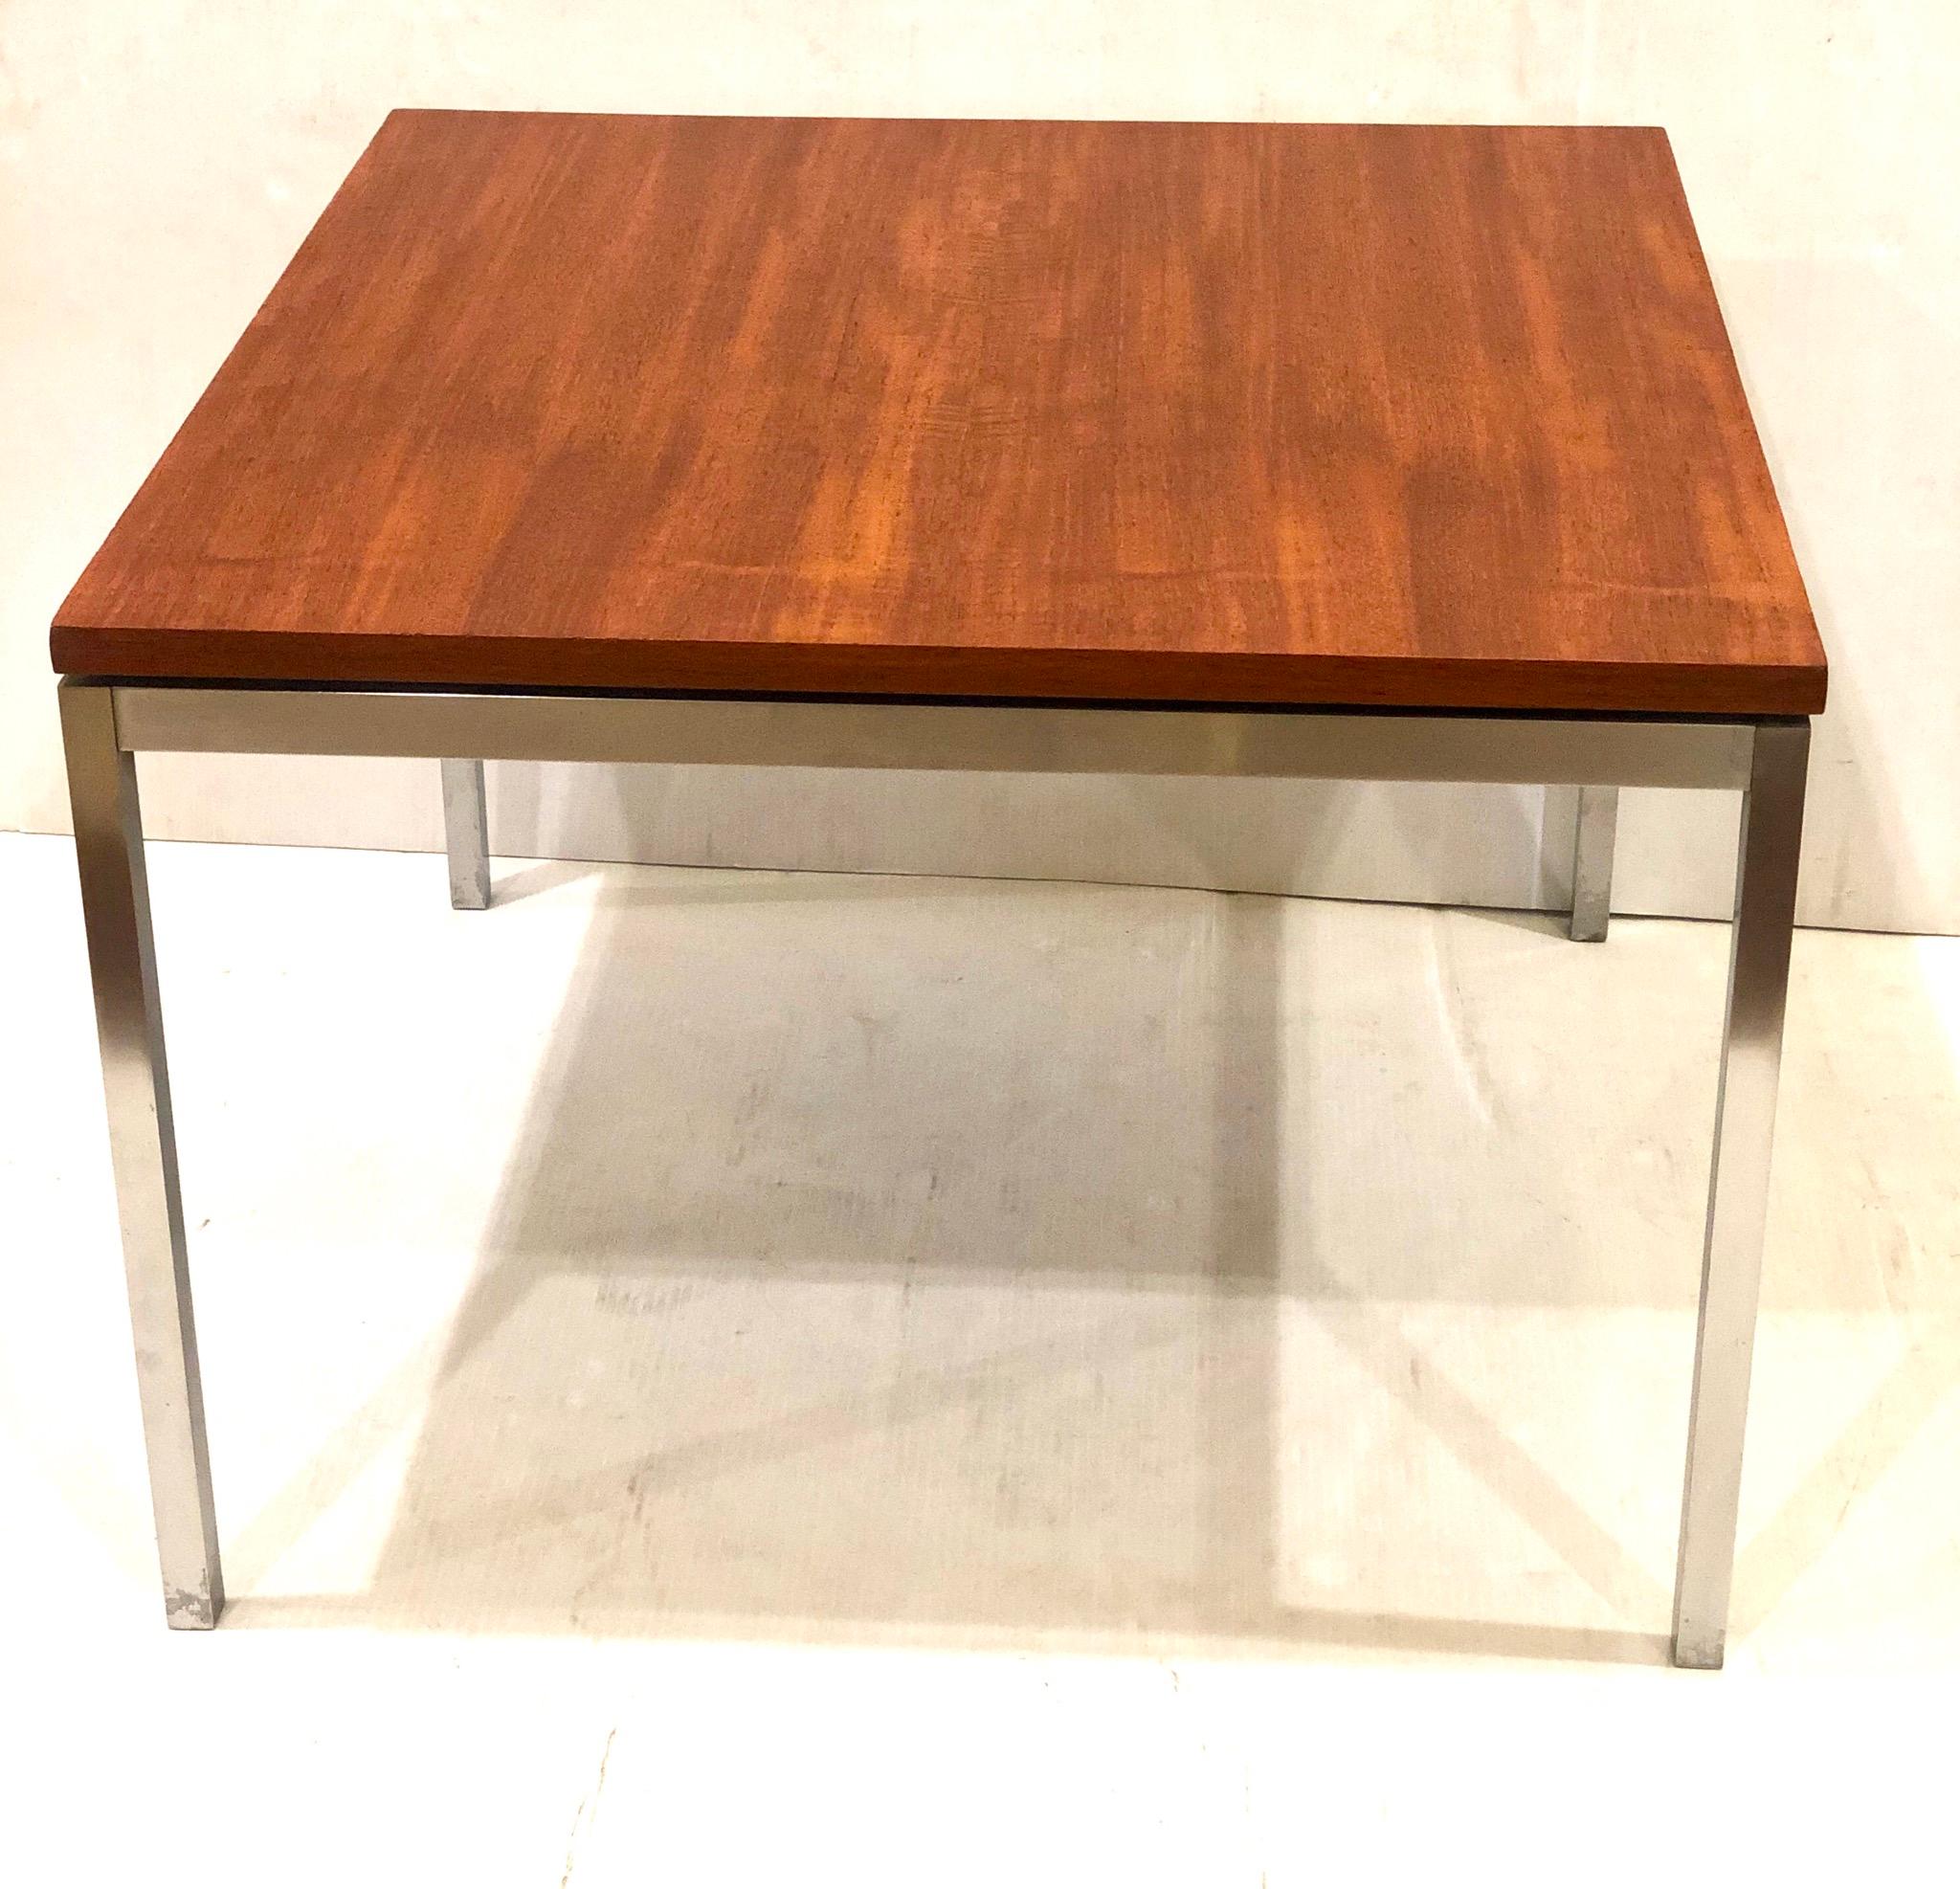 Mid-Century Modern American Midcentury Small Square Teak Coffee Table by Knoll